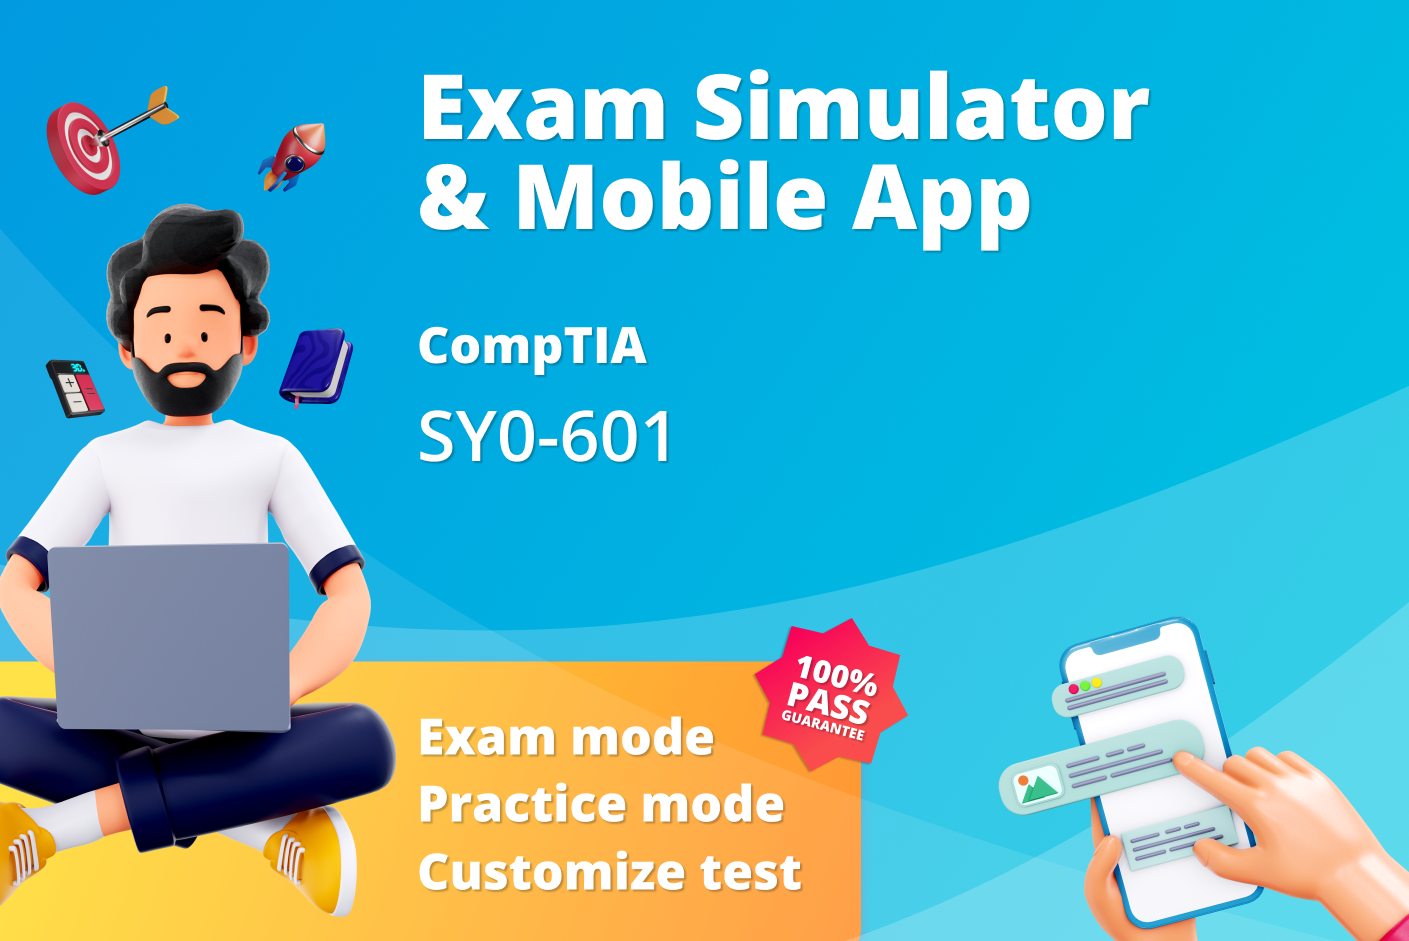 Boost your exam preparation with SY0-601 mock exams in Canada for a successful outcome